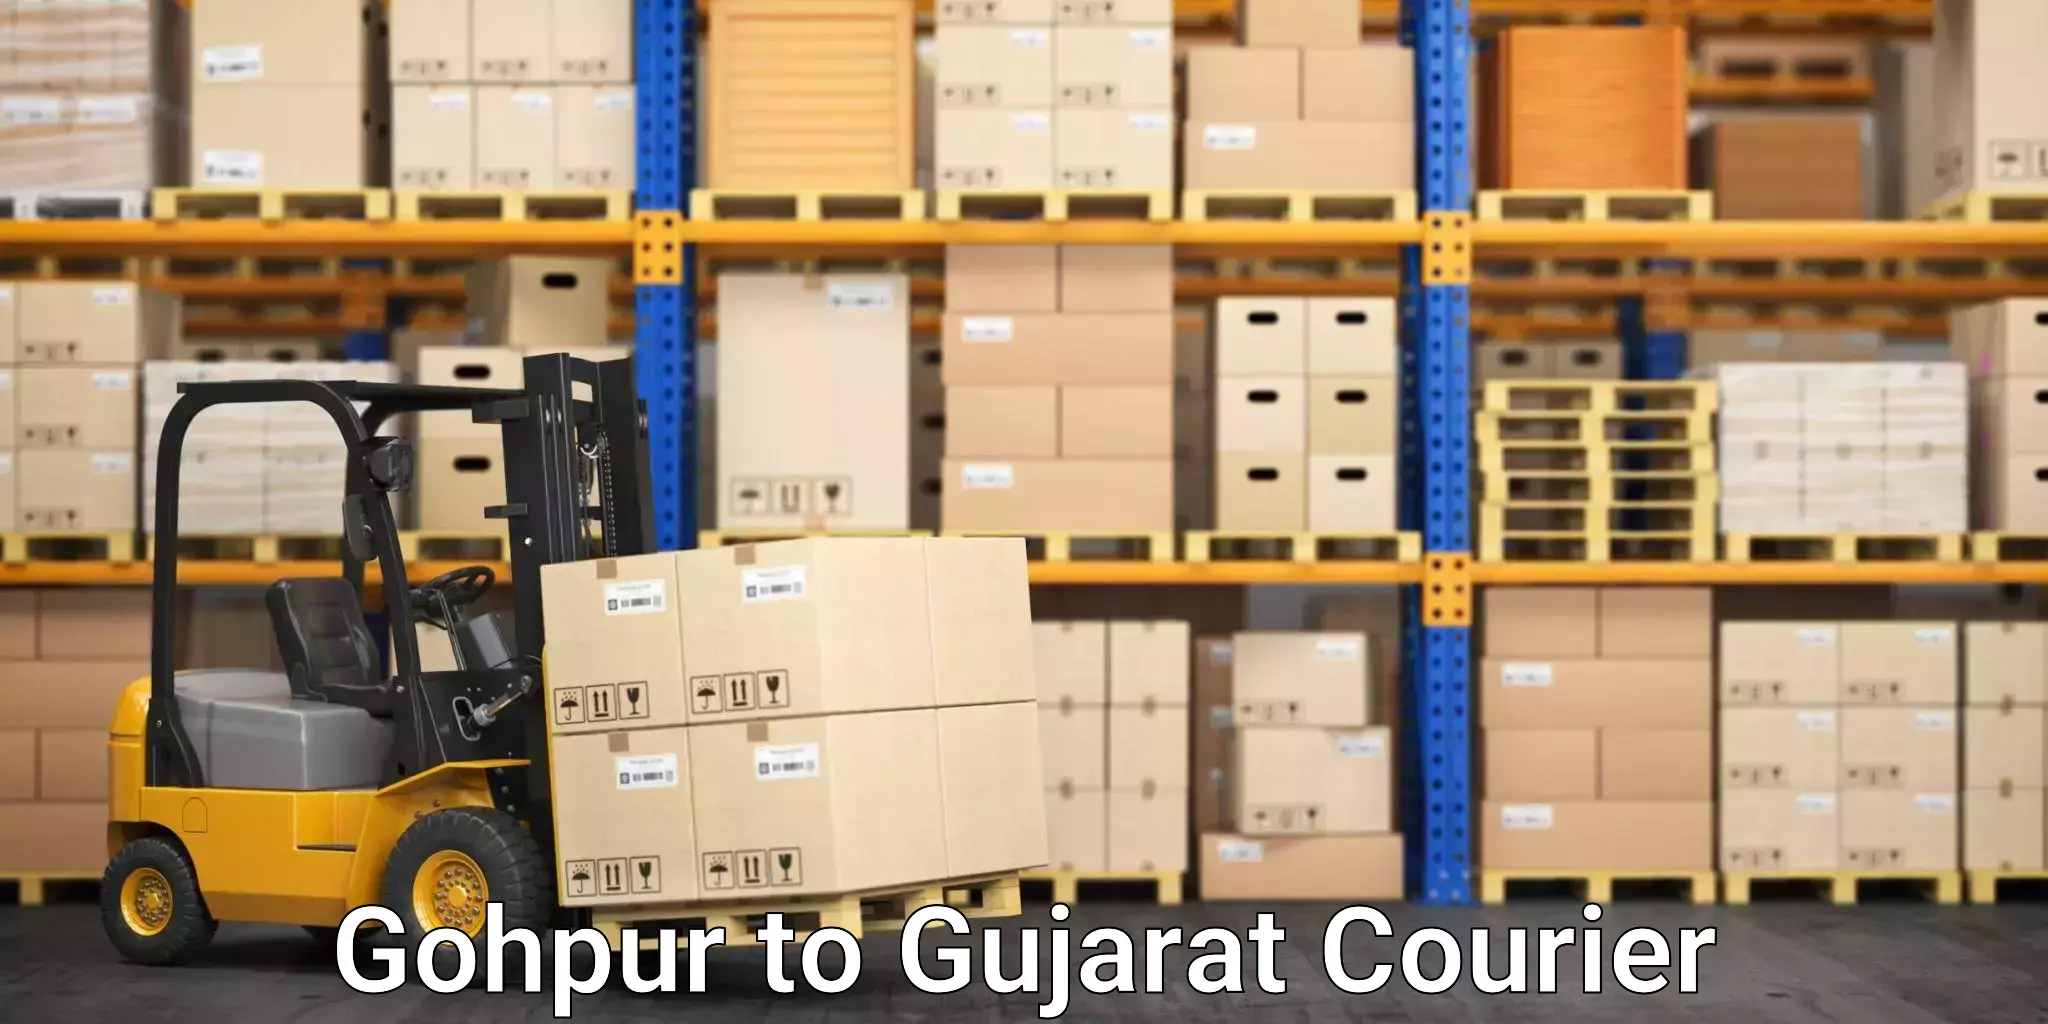 Advanced parcel tracking Gohpur to Mehsana